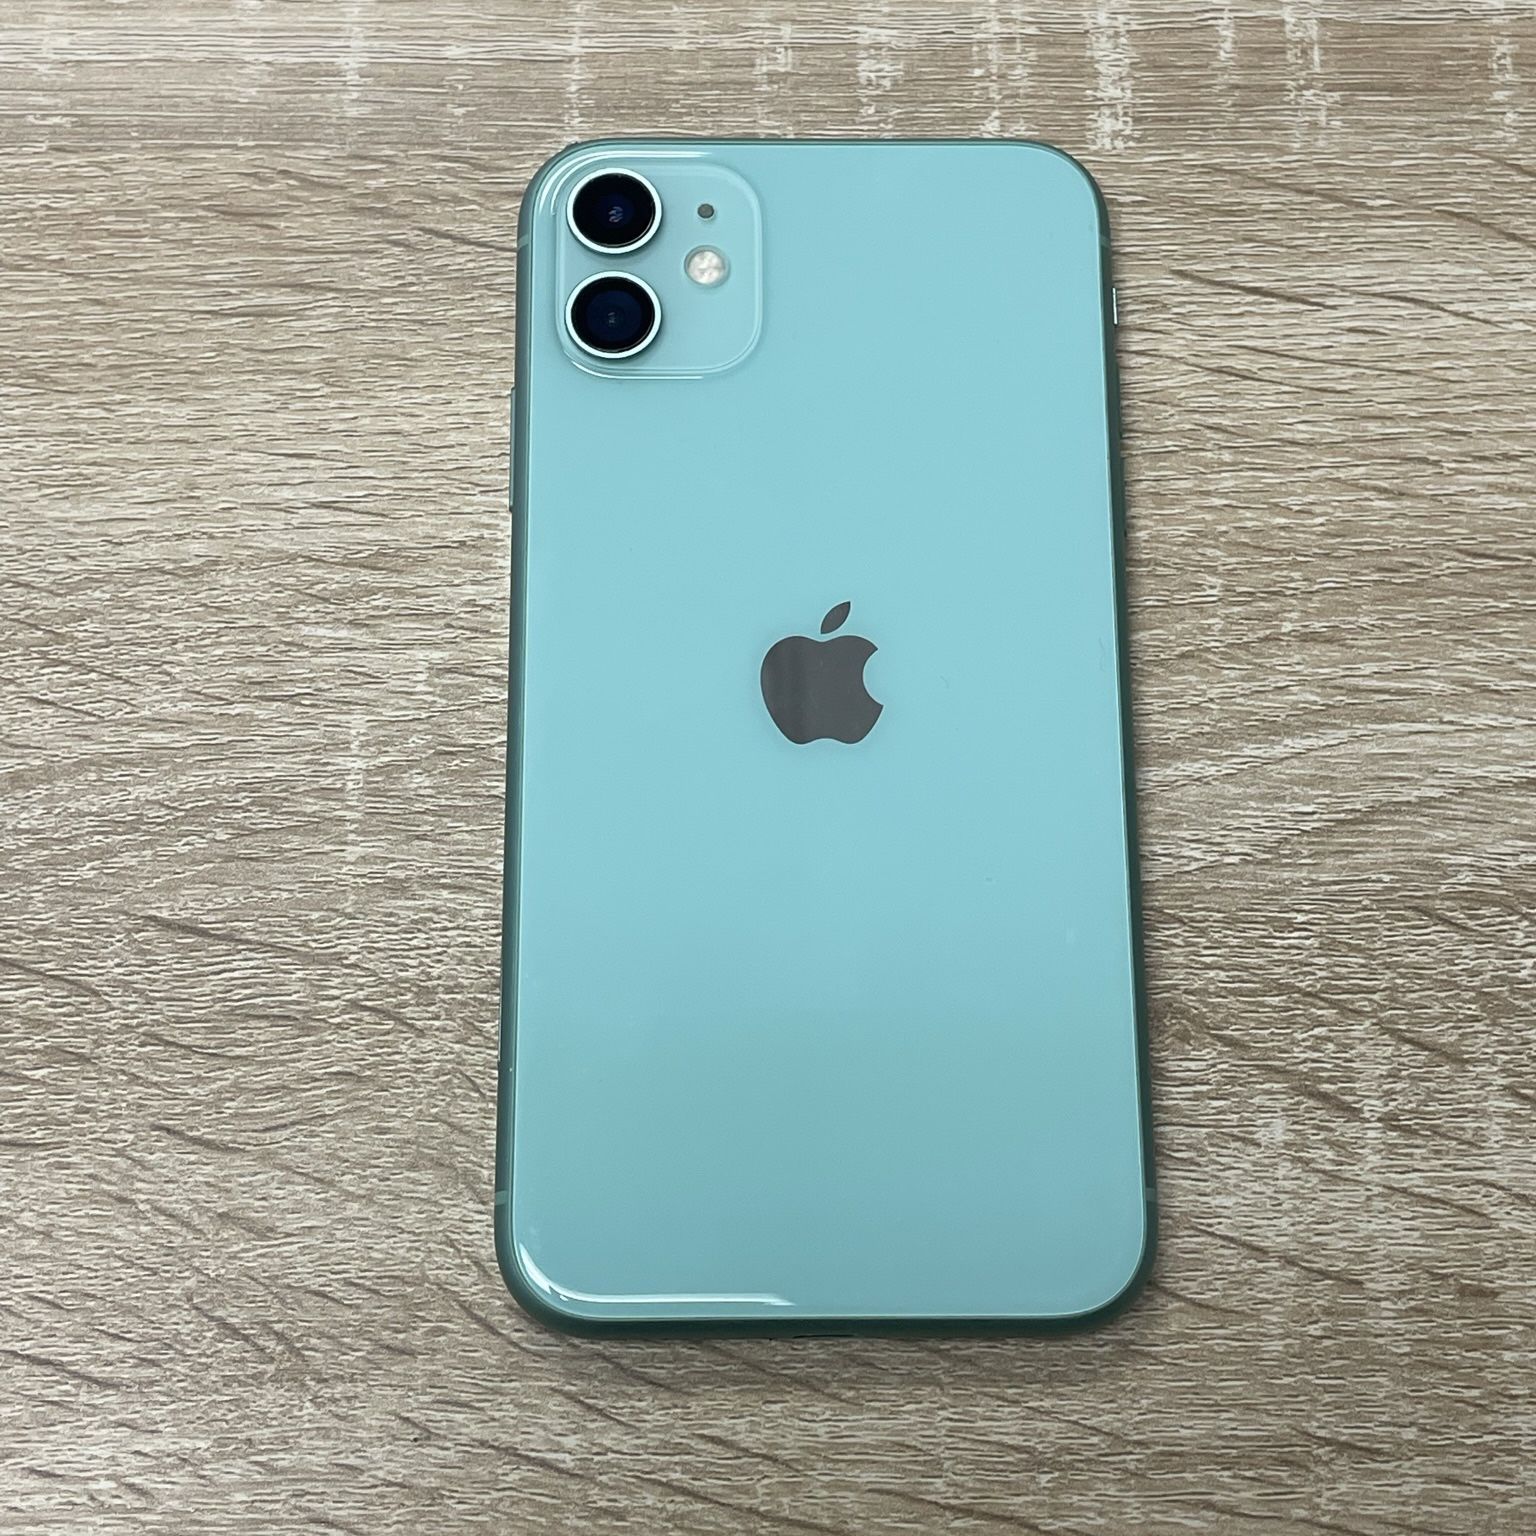 iPhone 11 - AT&T/Cricket - 64GB